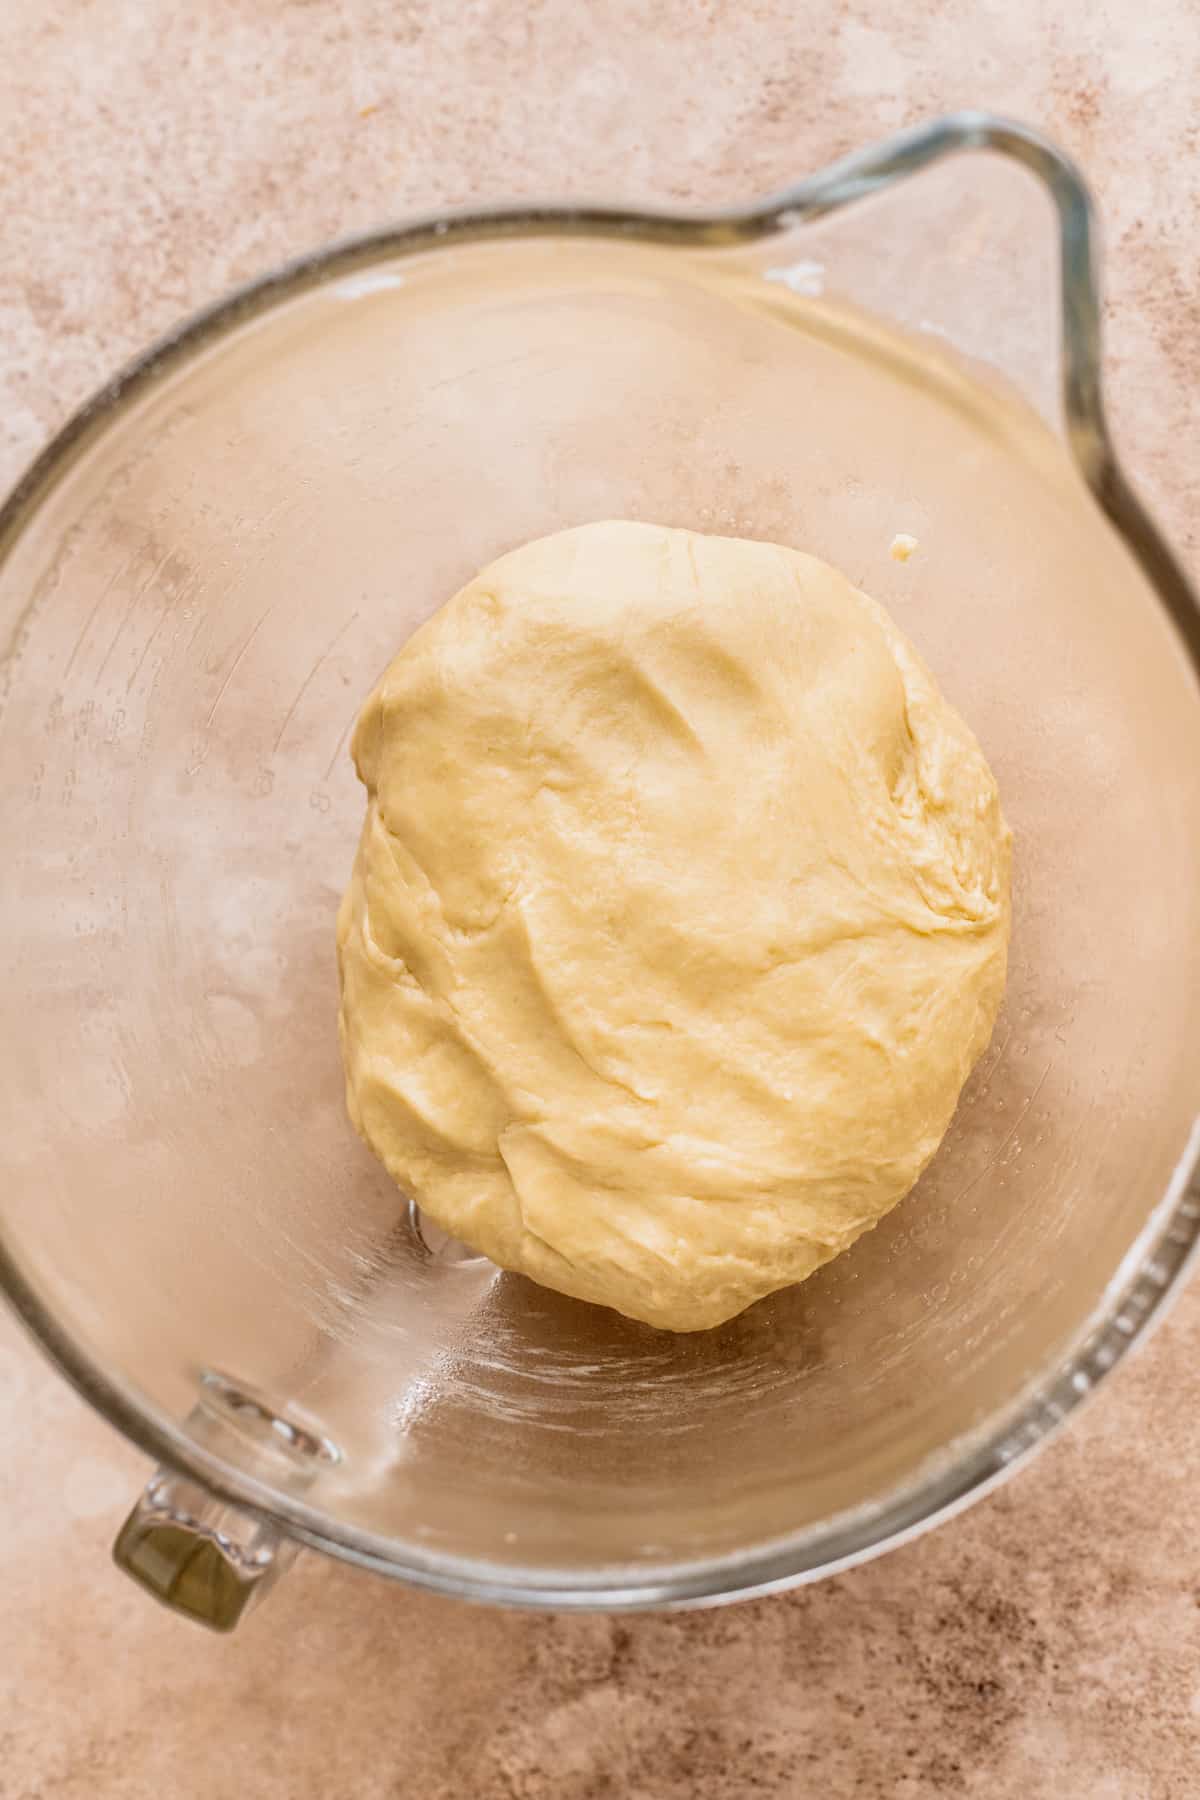 Dough before it rose in a glass bowl.